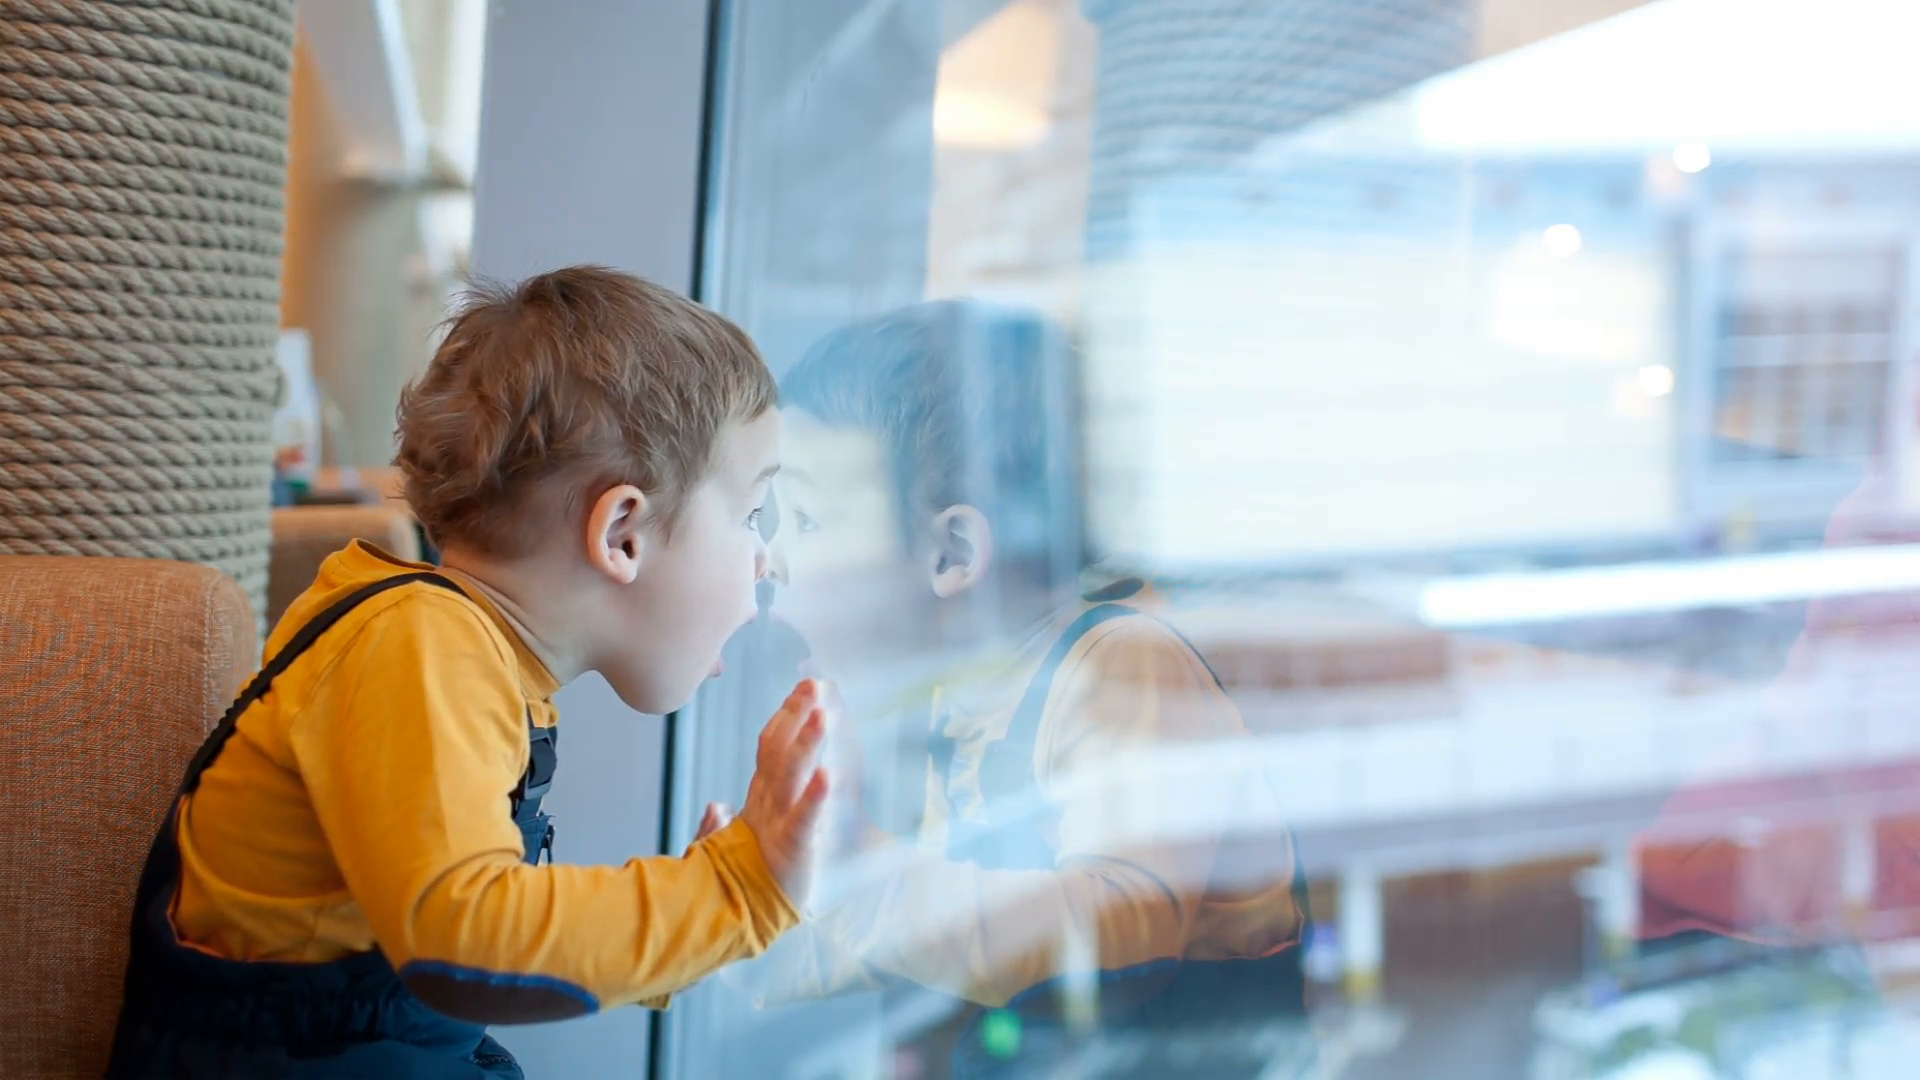 Boy Looking Out Window PNG - 166390